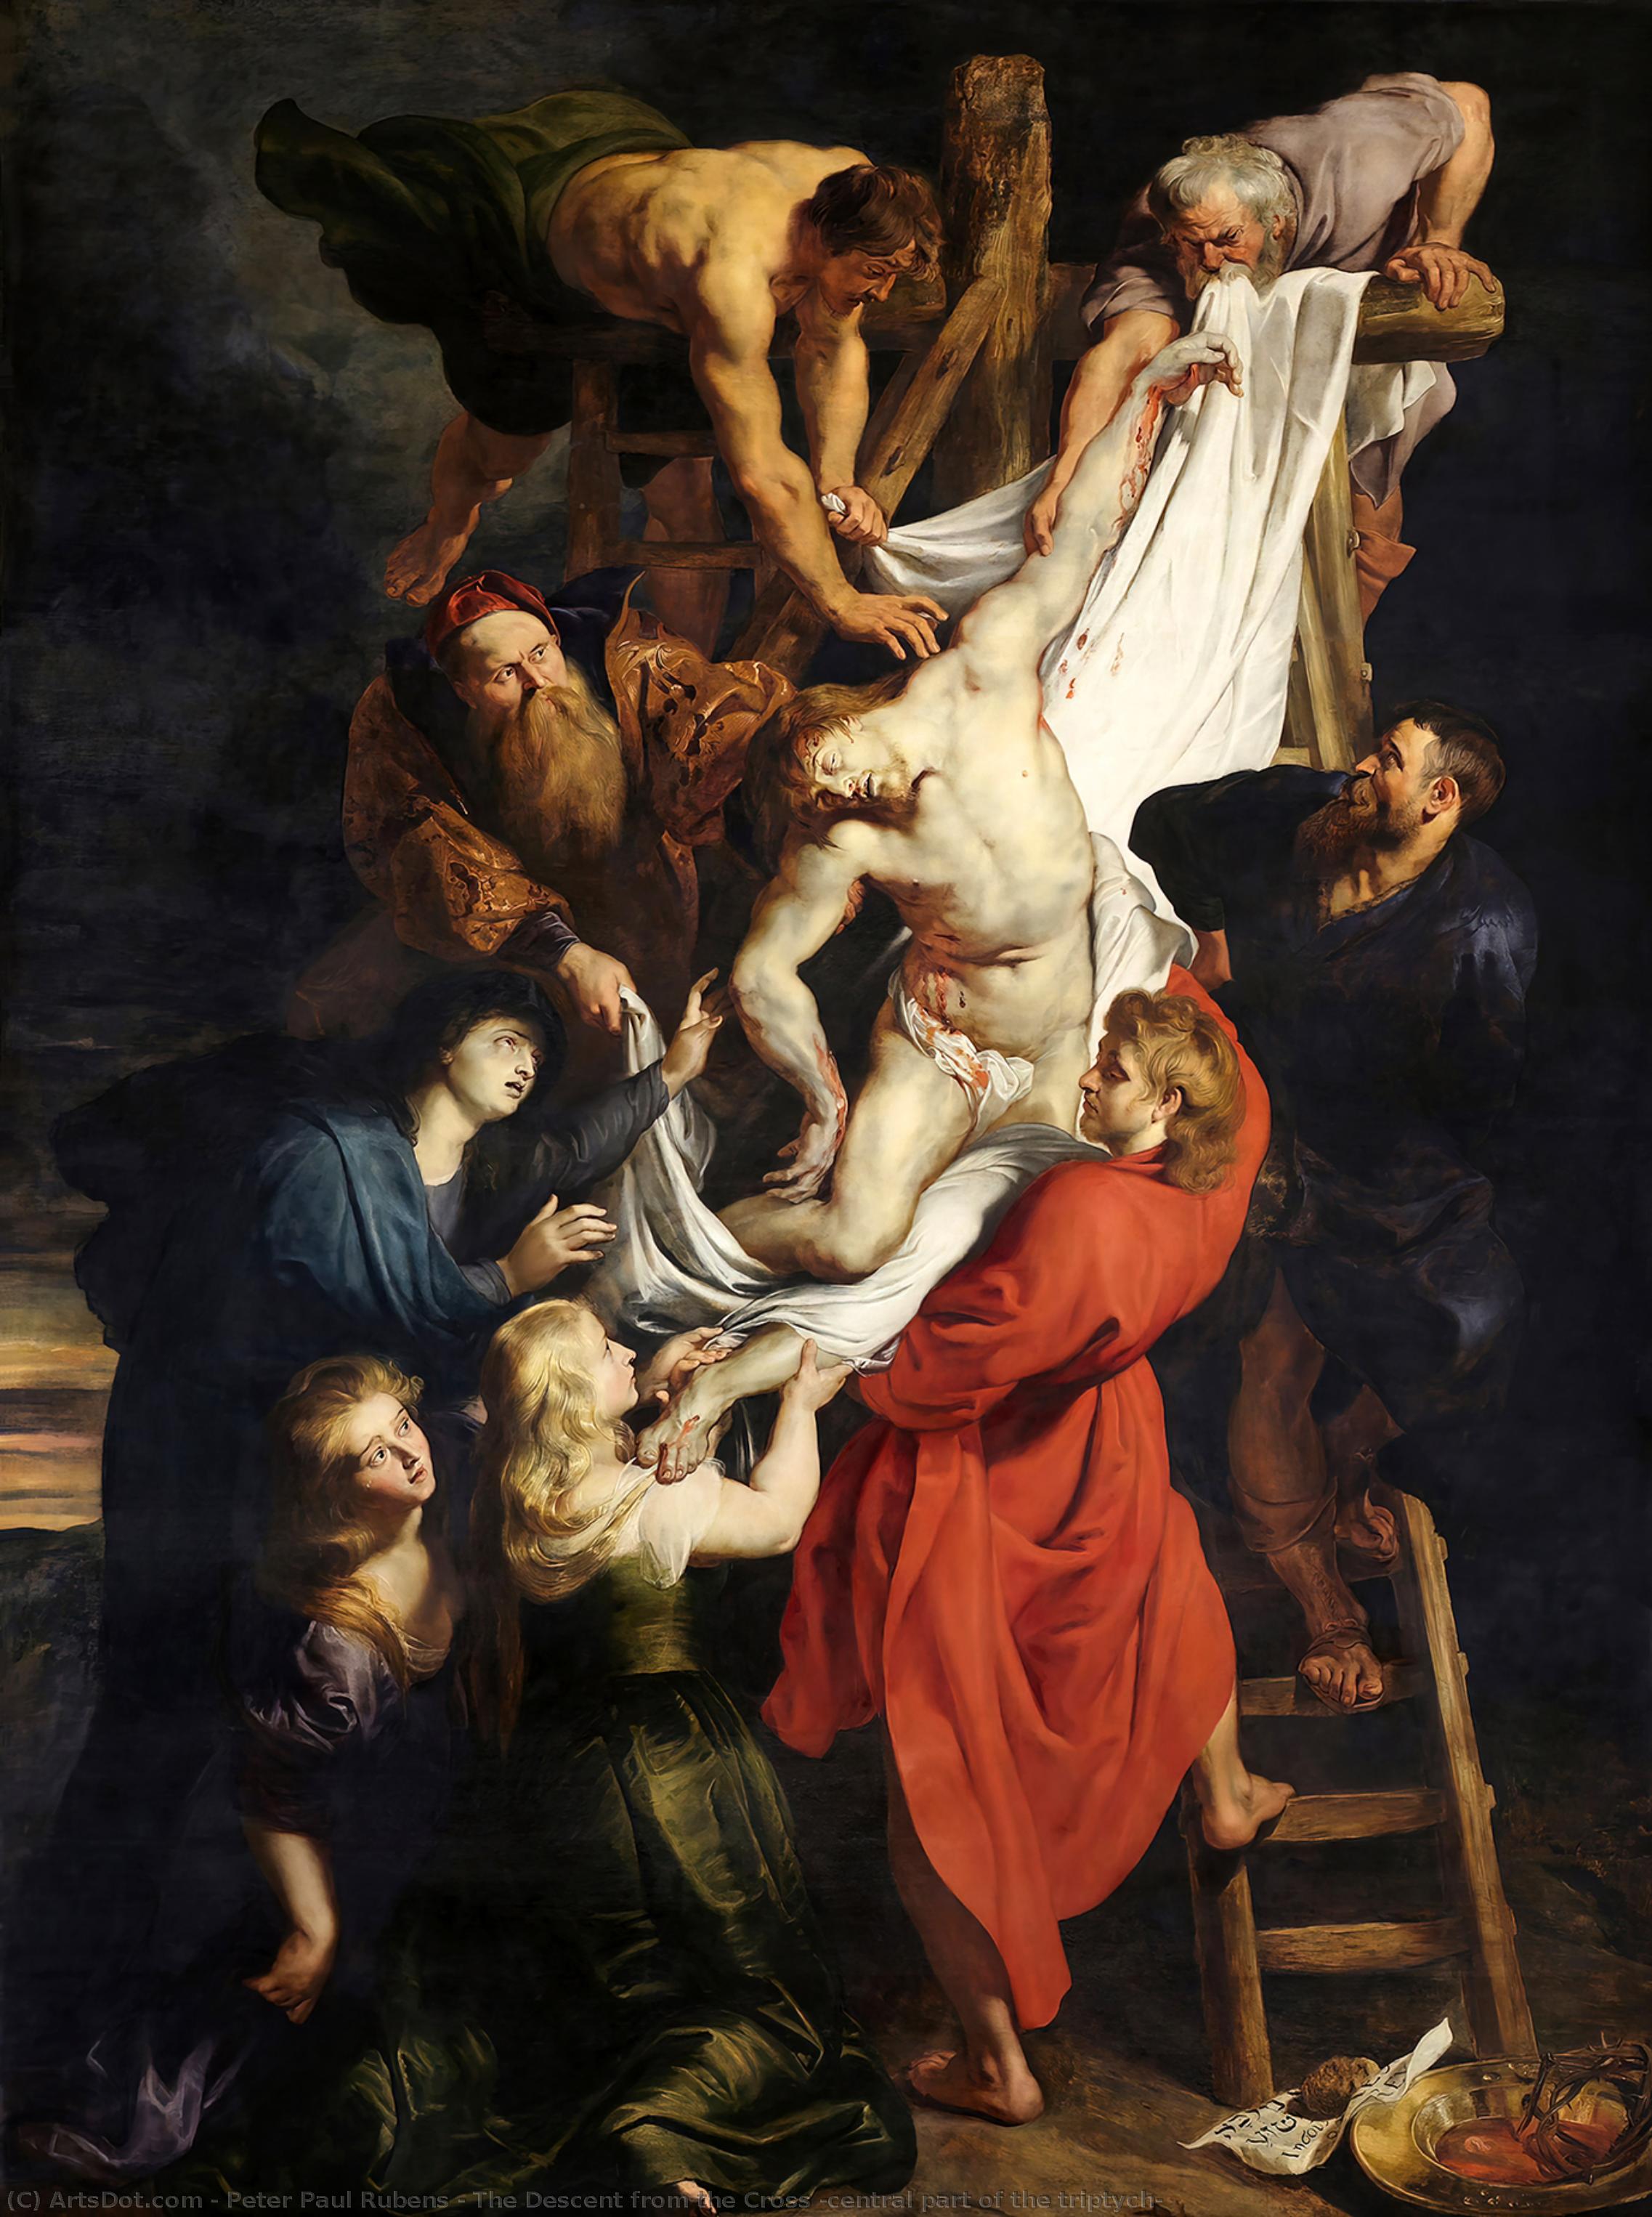 WikiOO.org - Güzel Sanatlar Ansiklopedisi - Resim, Resimler Peter Paul Rubens - The Descent from the Cross (central part of the triptych)